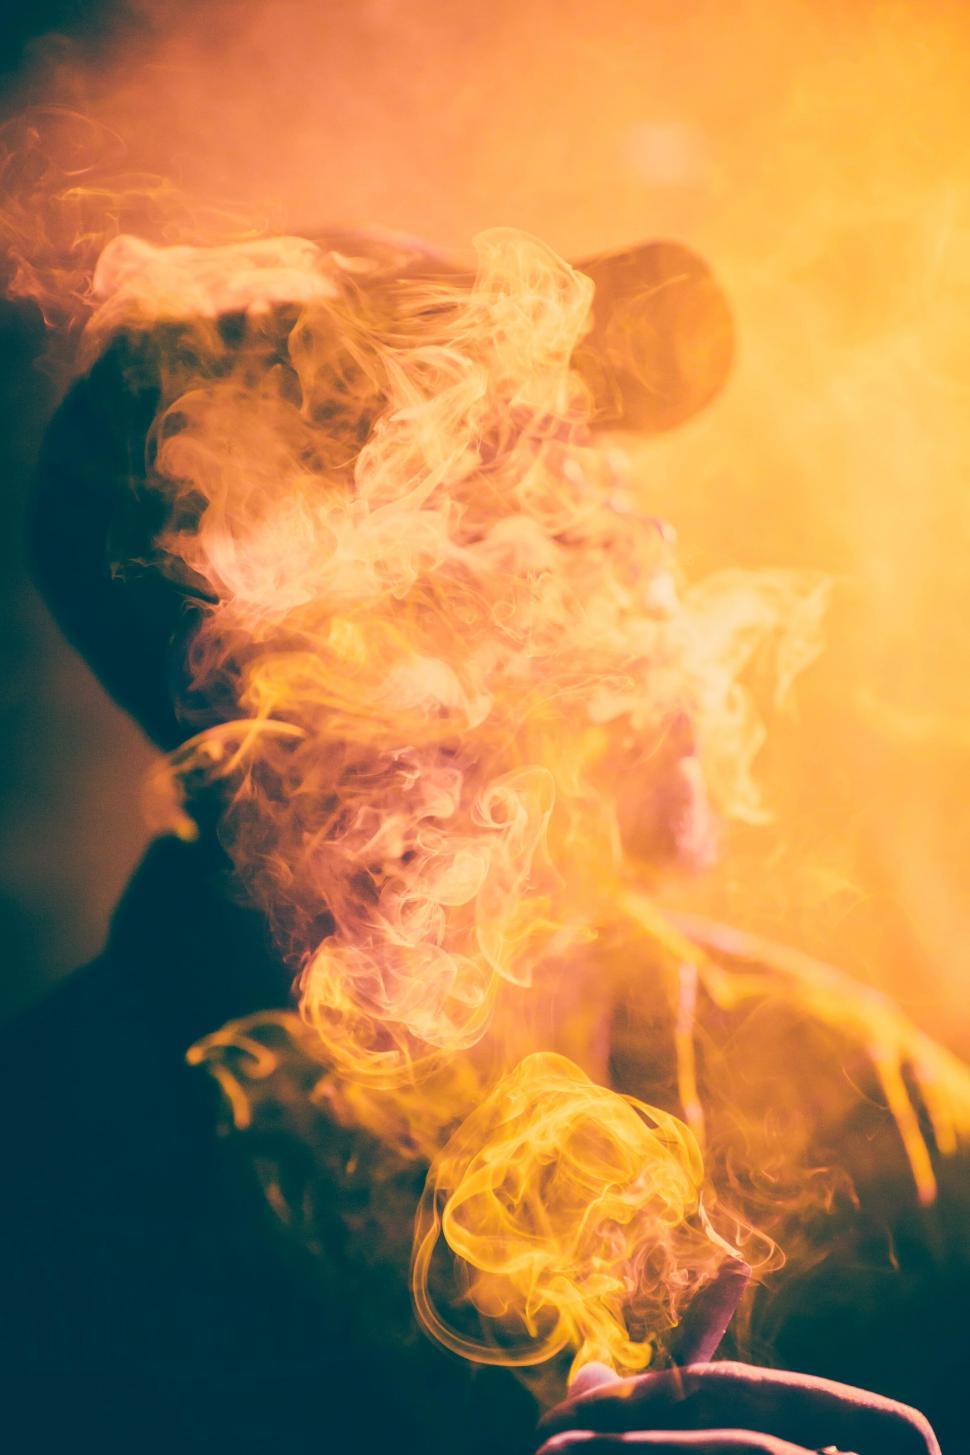 Free Image of Person enveloped in colorful smoke 